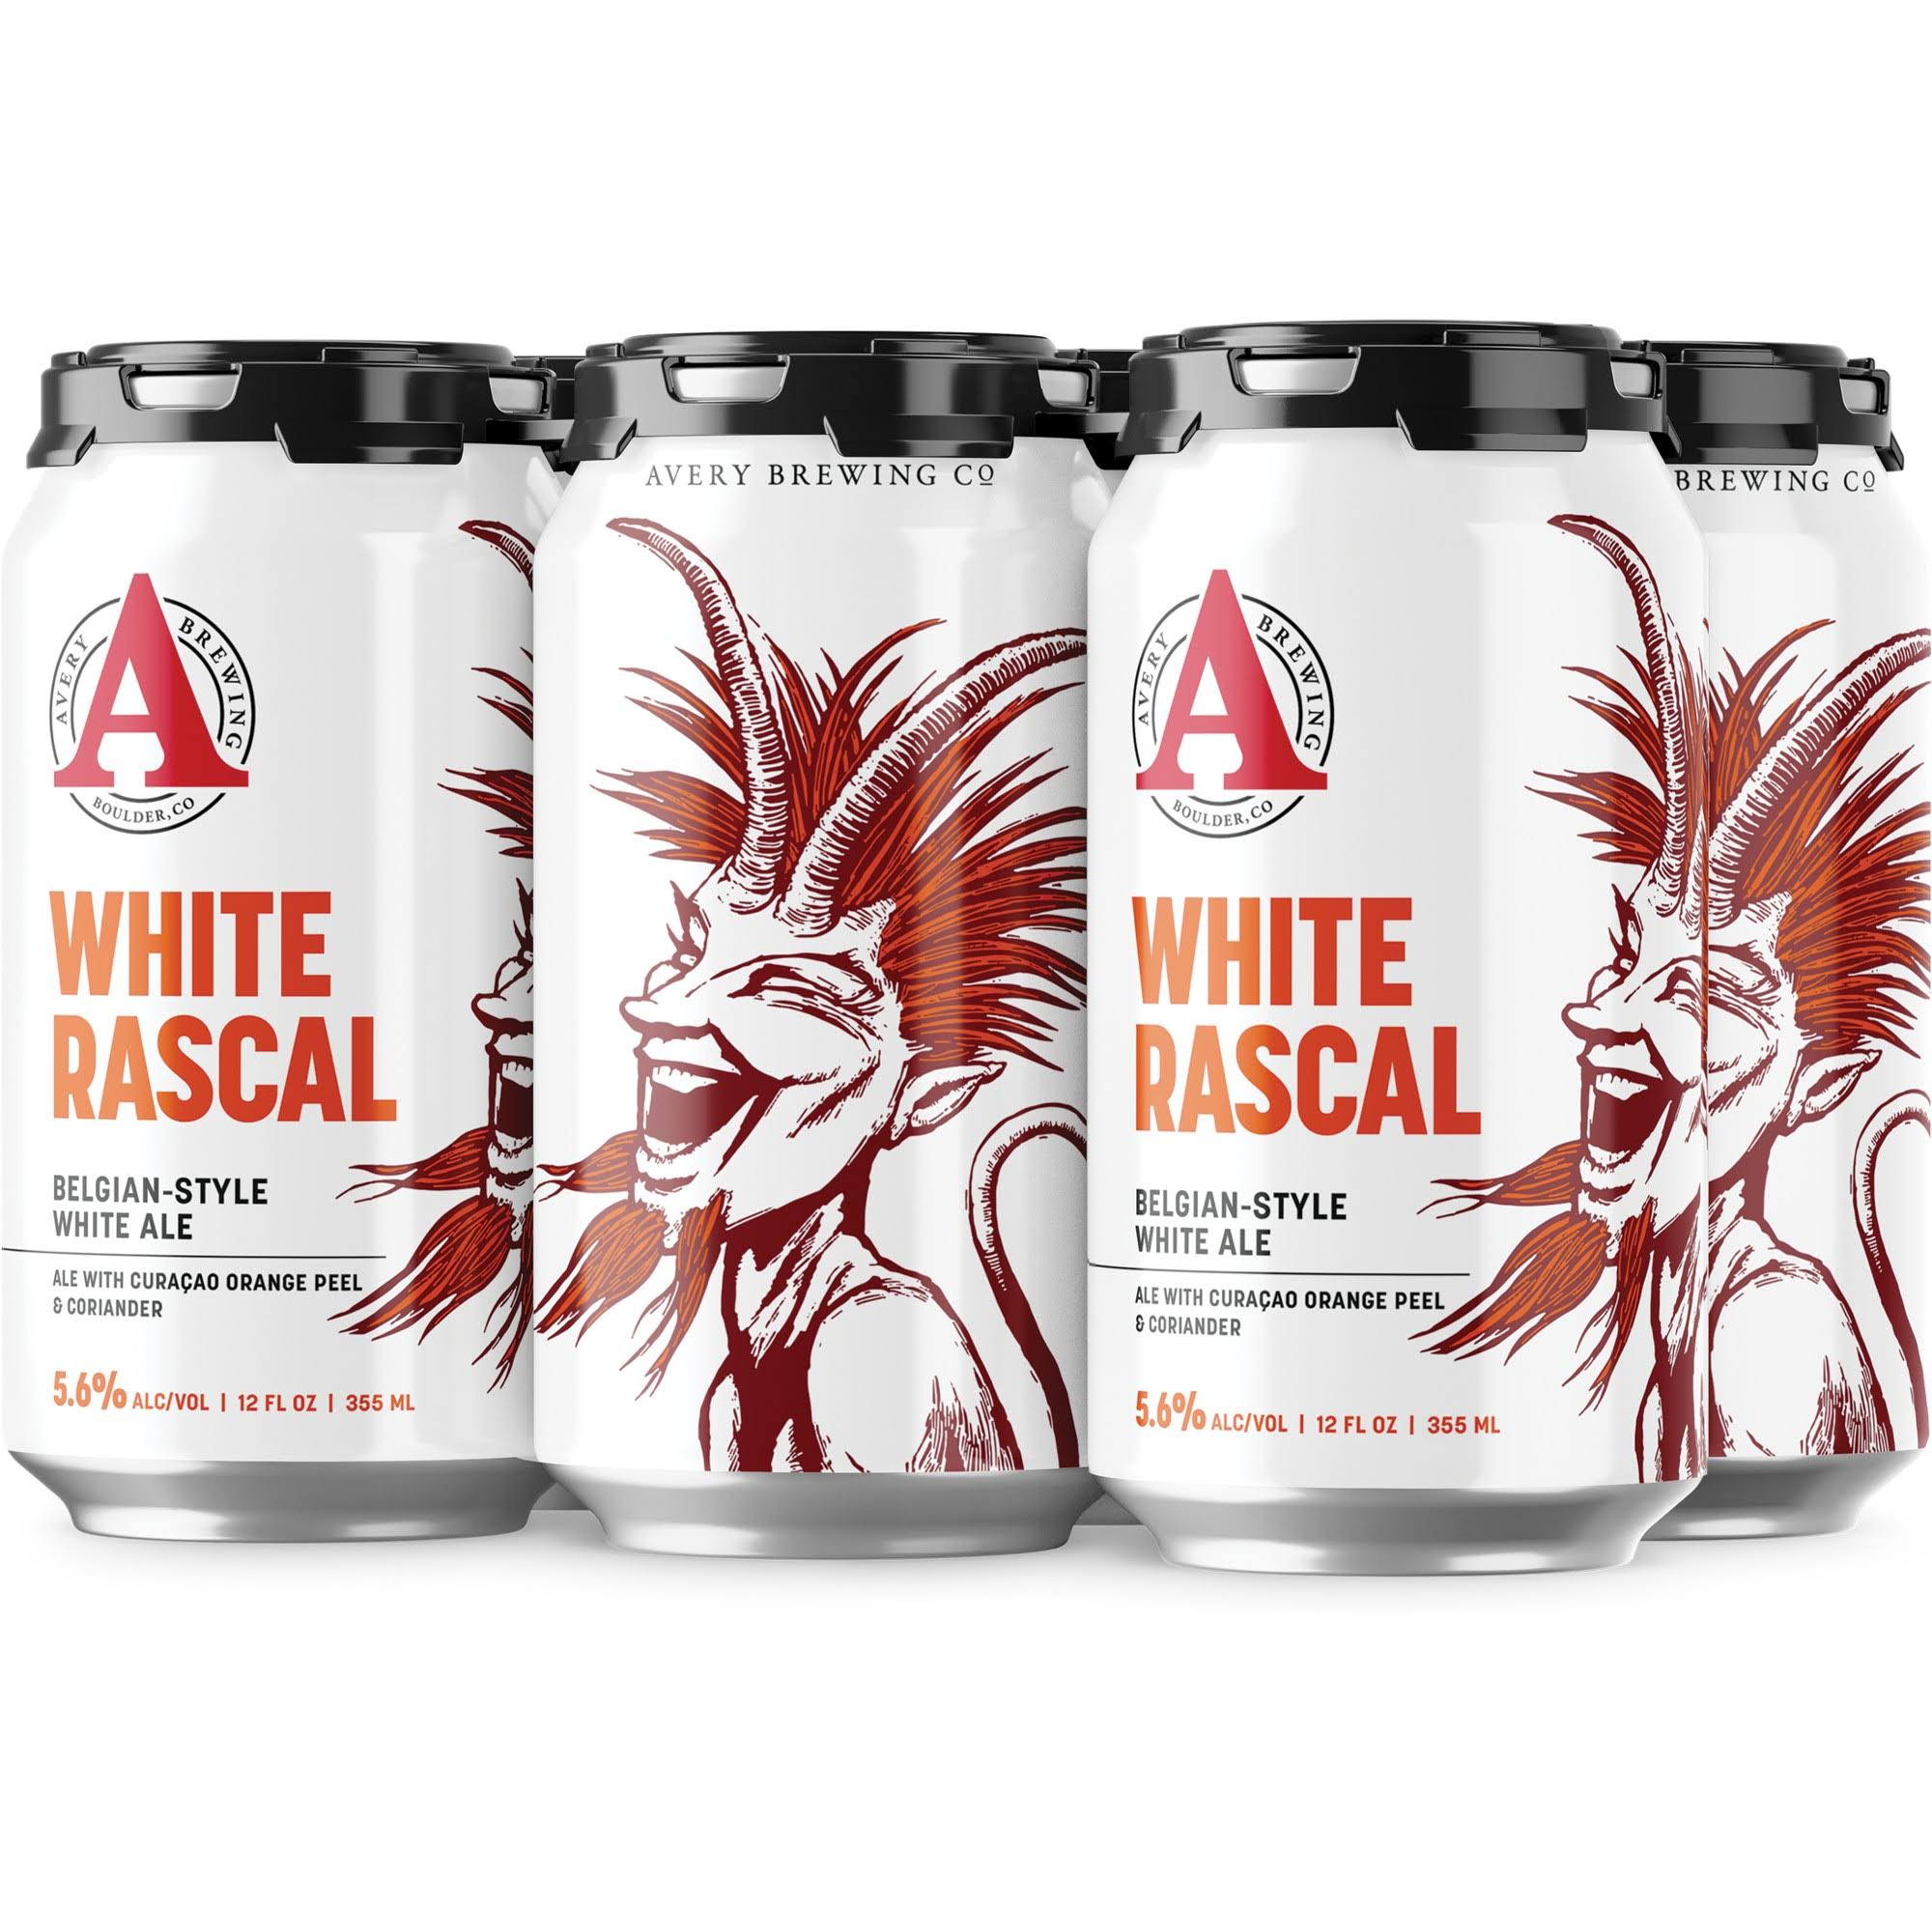 Avery White Rascal Beer - 6 pack, 12 fl oz cans